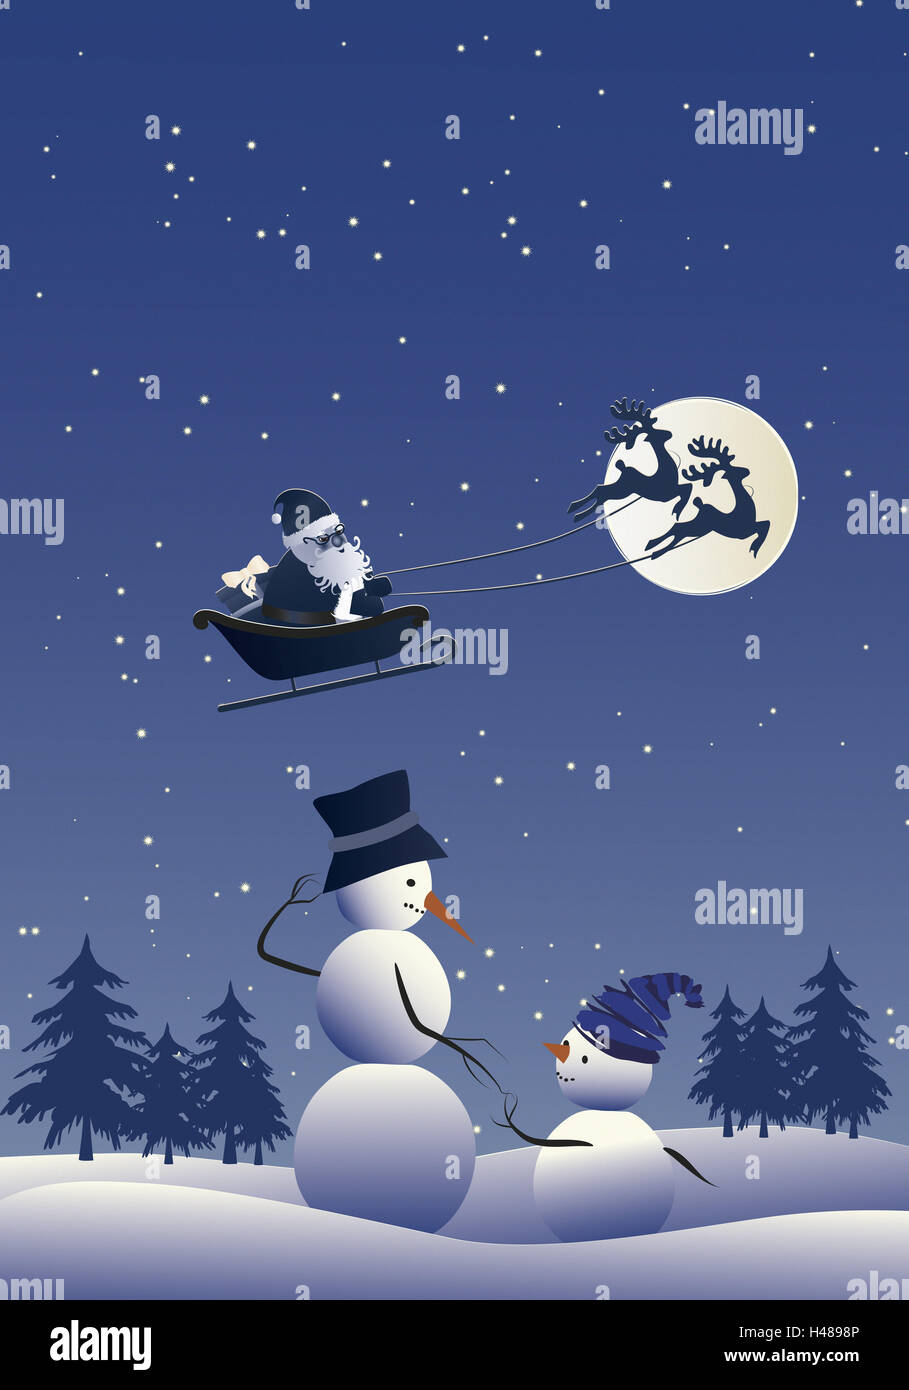 Illustration, Santa Claus, reindeer sleigh, fly, snowmen, two, wood, moonlit night, graphics, Christmas, for Christmas, wintry, snow figures, largely, small, family, friends, together, together, smile, distribute happy, happy, winter scenery, winter wood, Stock Photo